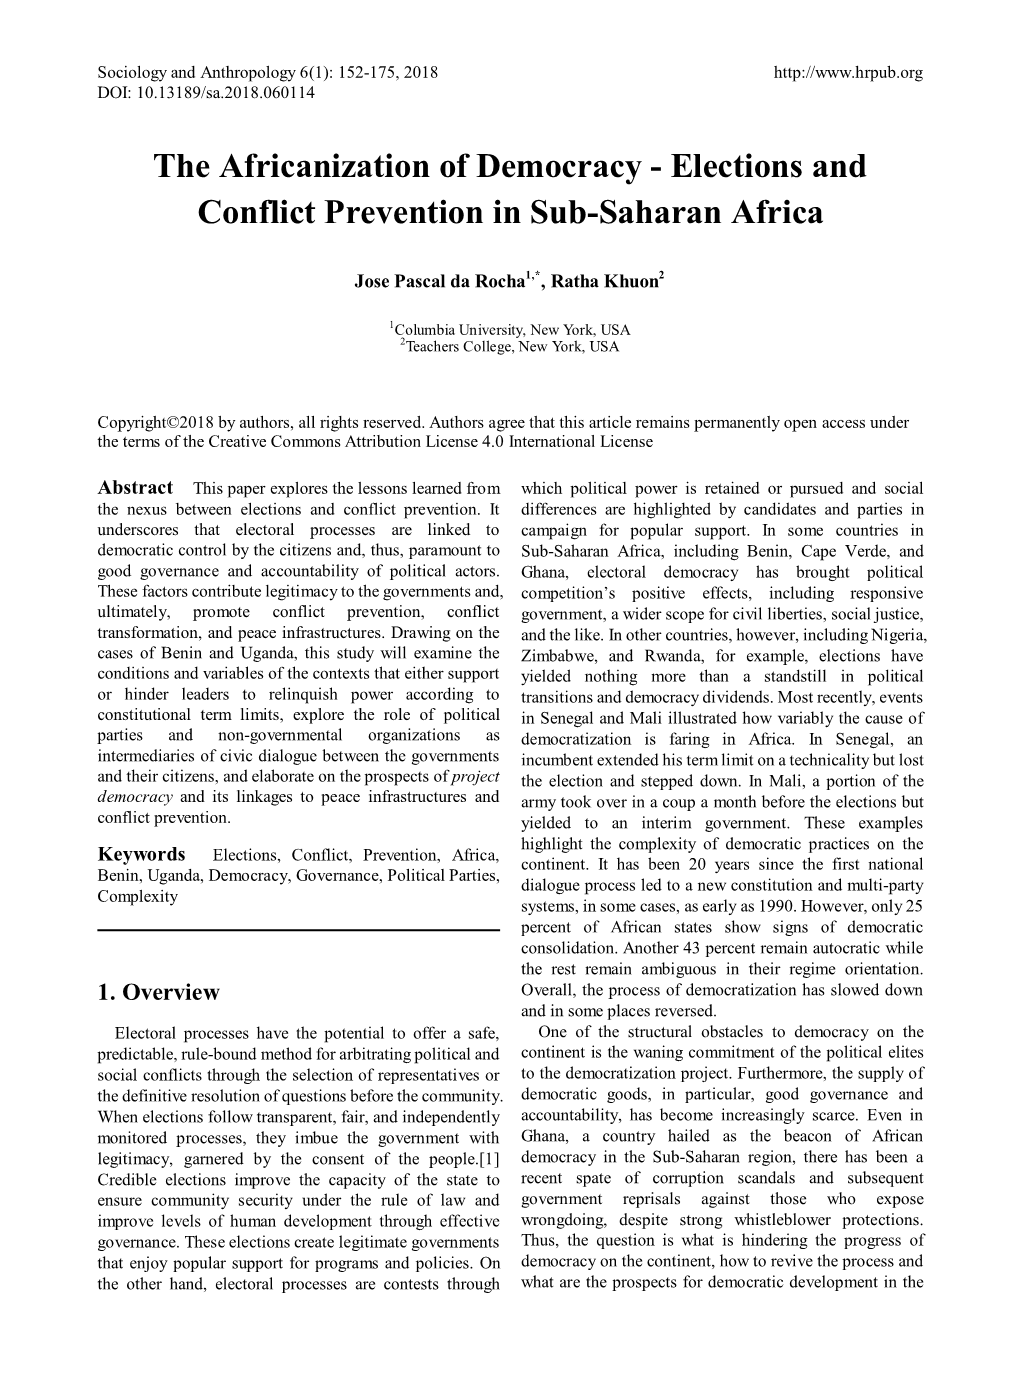 The Africanization of Democracy - Elections and Conflict Prevention in Sub-Saharan Africa